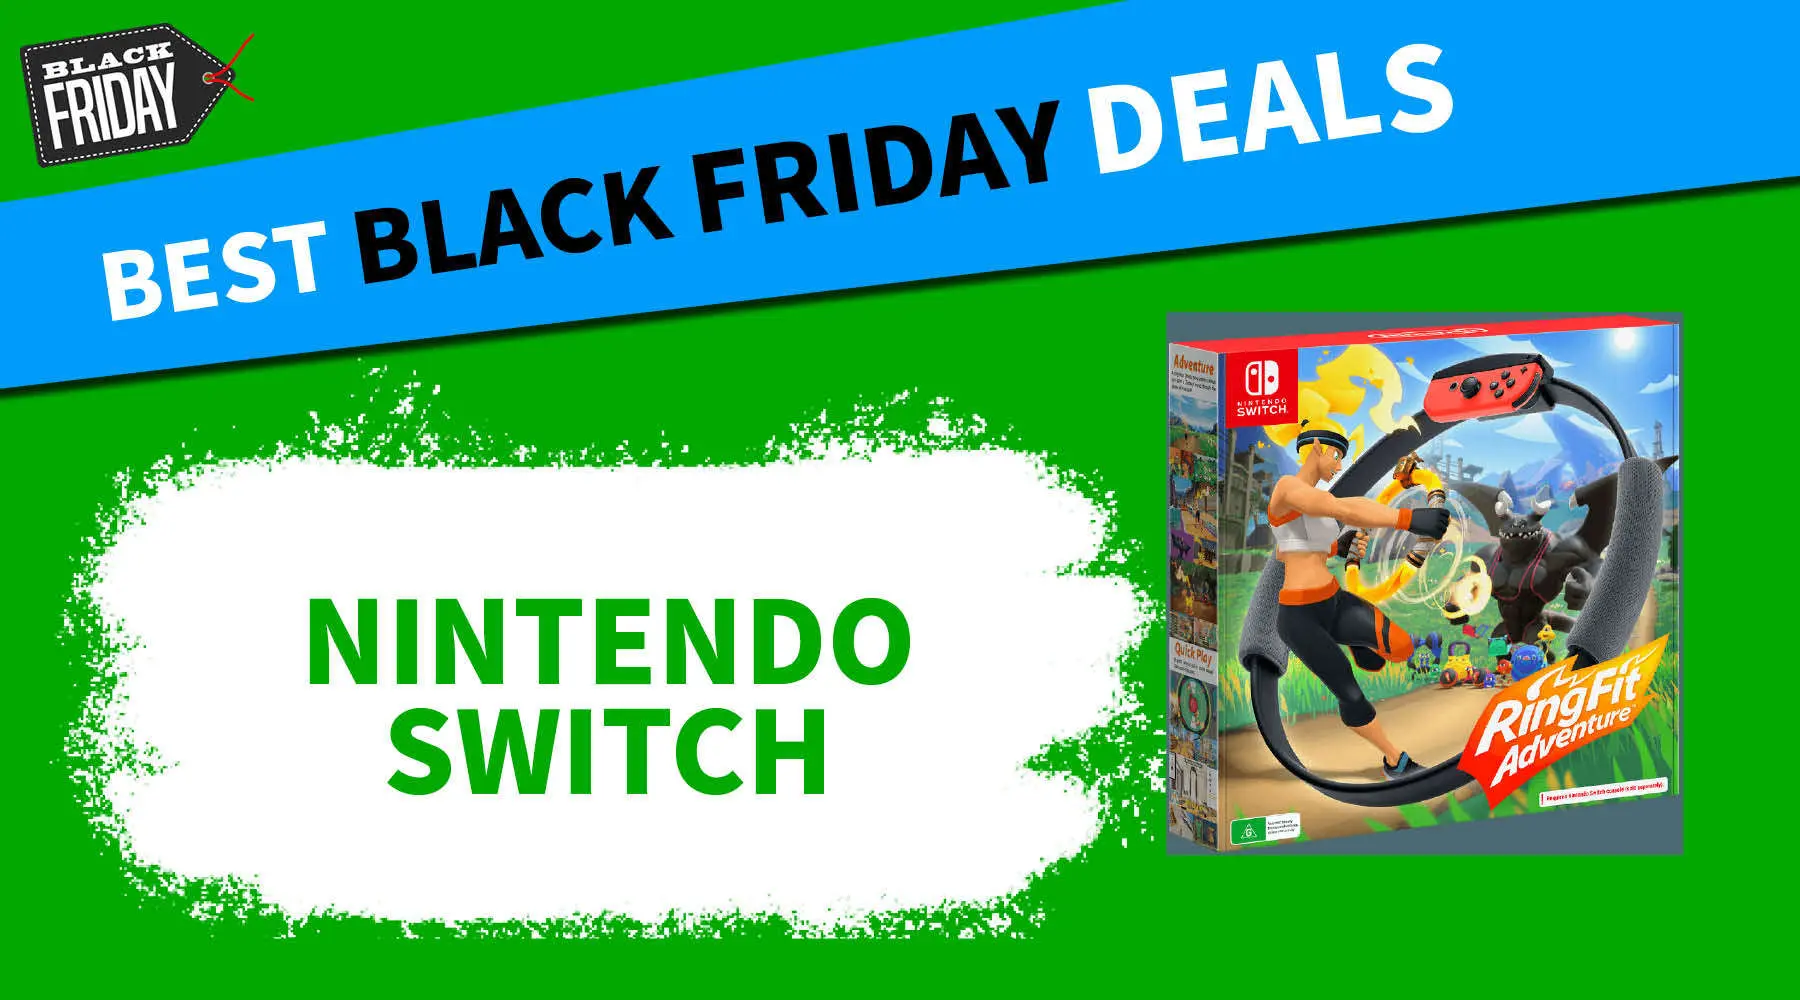 Get up to 59% off Nintendo Switch games this Black Friday - Is Nintendo Participating In Black Friday Deals